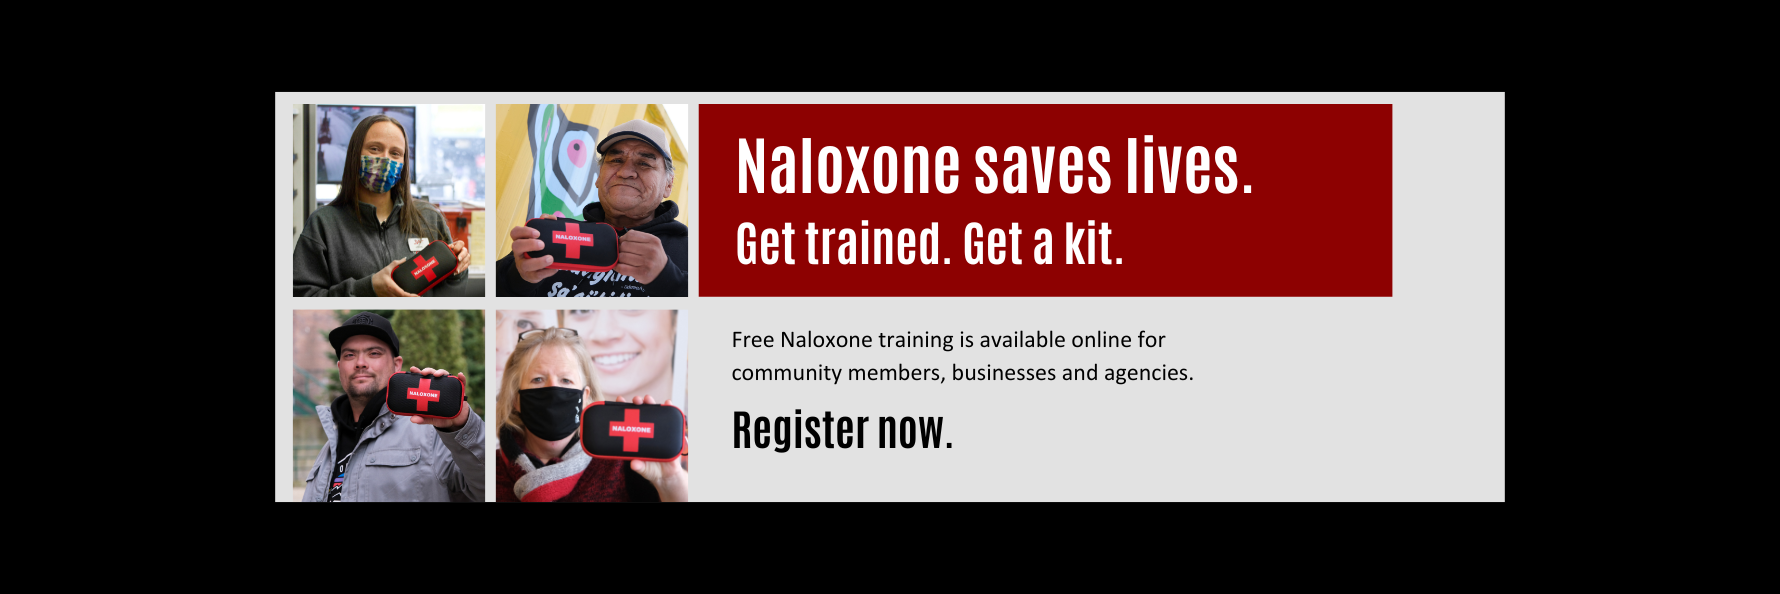 Images of people holding a naloxone kit. Text: Naloxone saves lives. Get trained. Get a kit. Free online Naloxone training is available for community members, businesses and agencies. Register now.